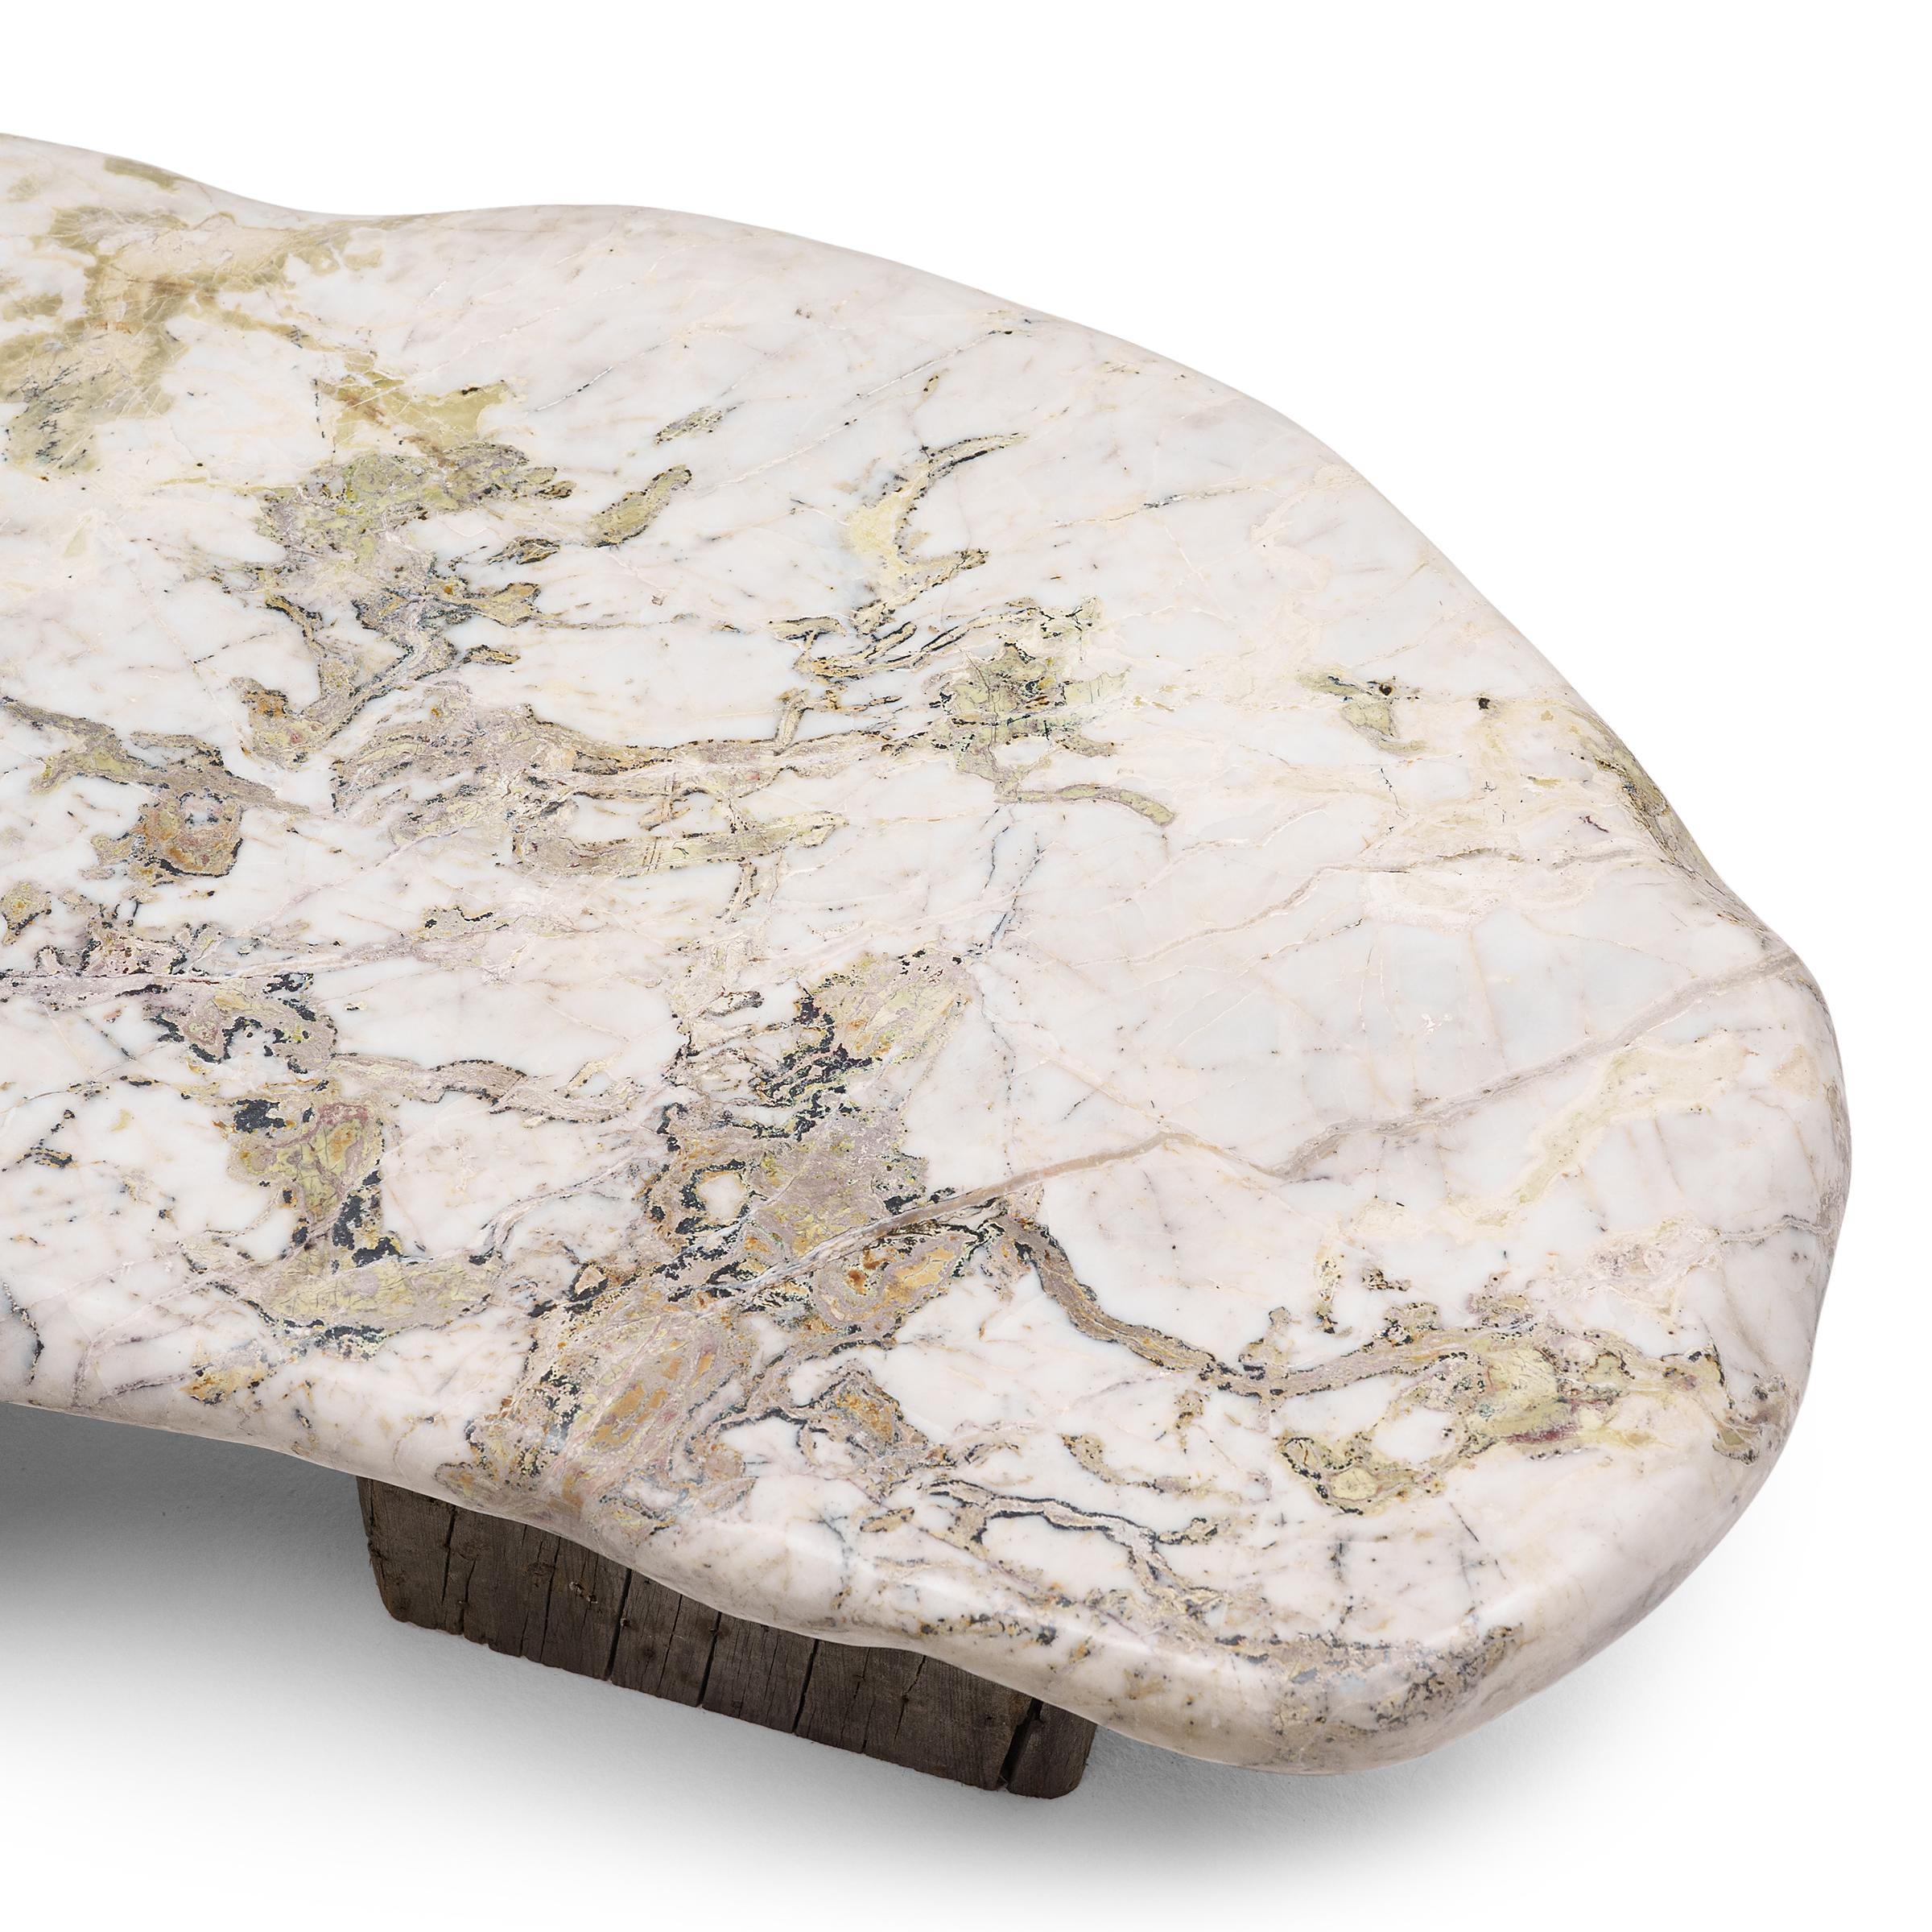 This low, stone top table exemplifies Organic Modern style with an emphasis on natural materials. The organic shape and irregular patterning of the stone slab top evokes the complexities of nature, reminiscent of a snow-covered glacier or a